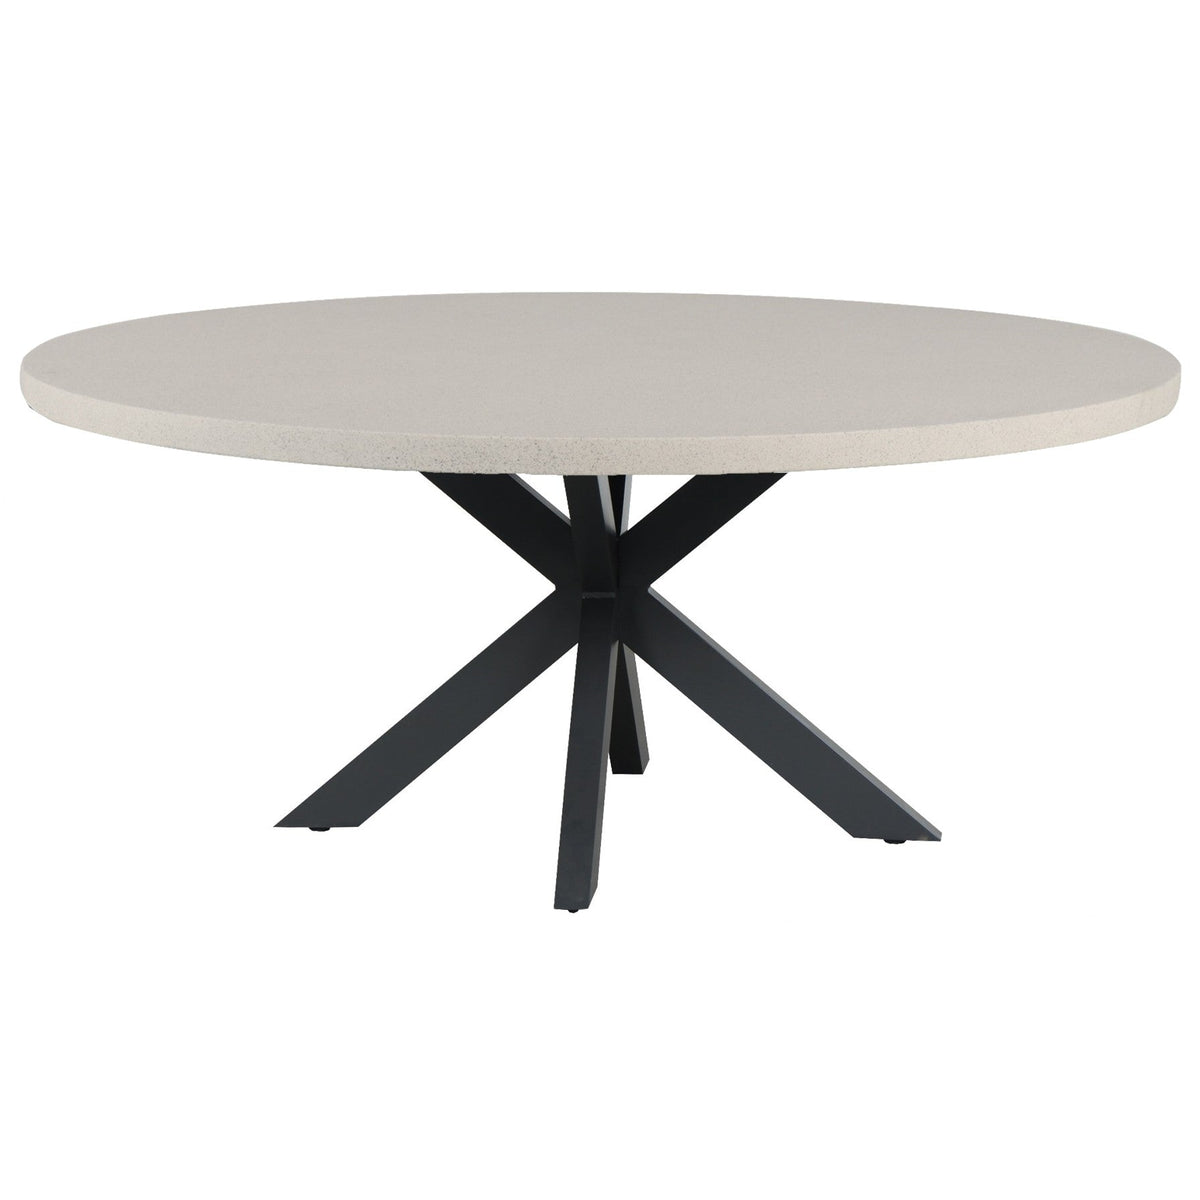 Round Terrazzo Look Cement Dining Table 1500mm